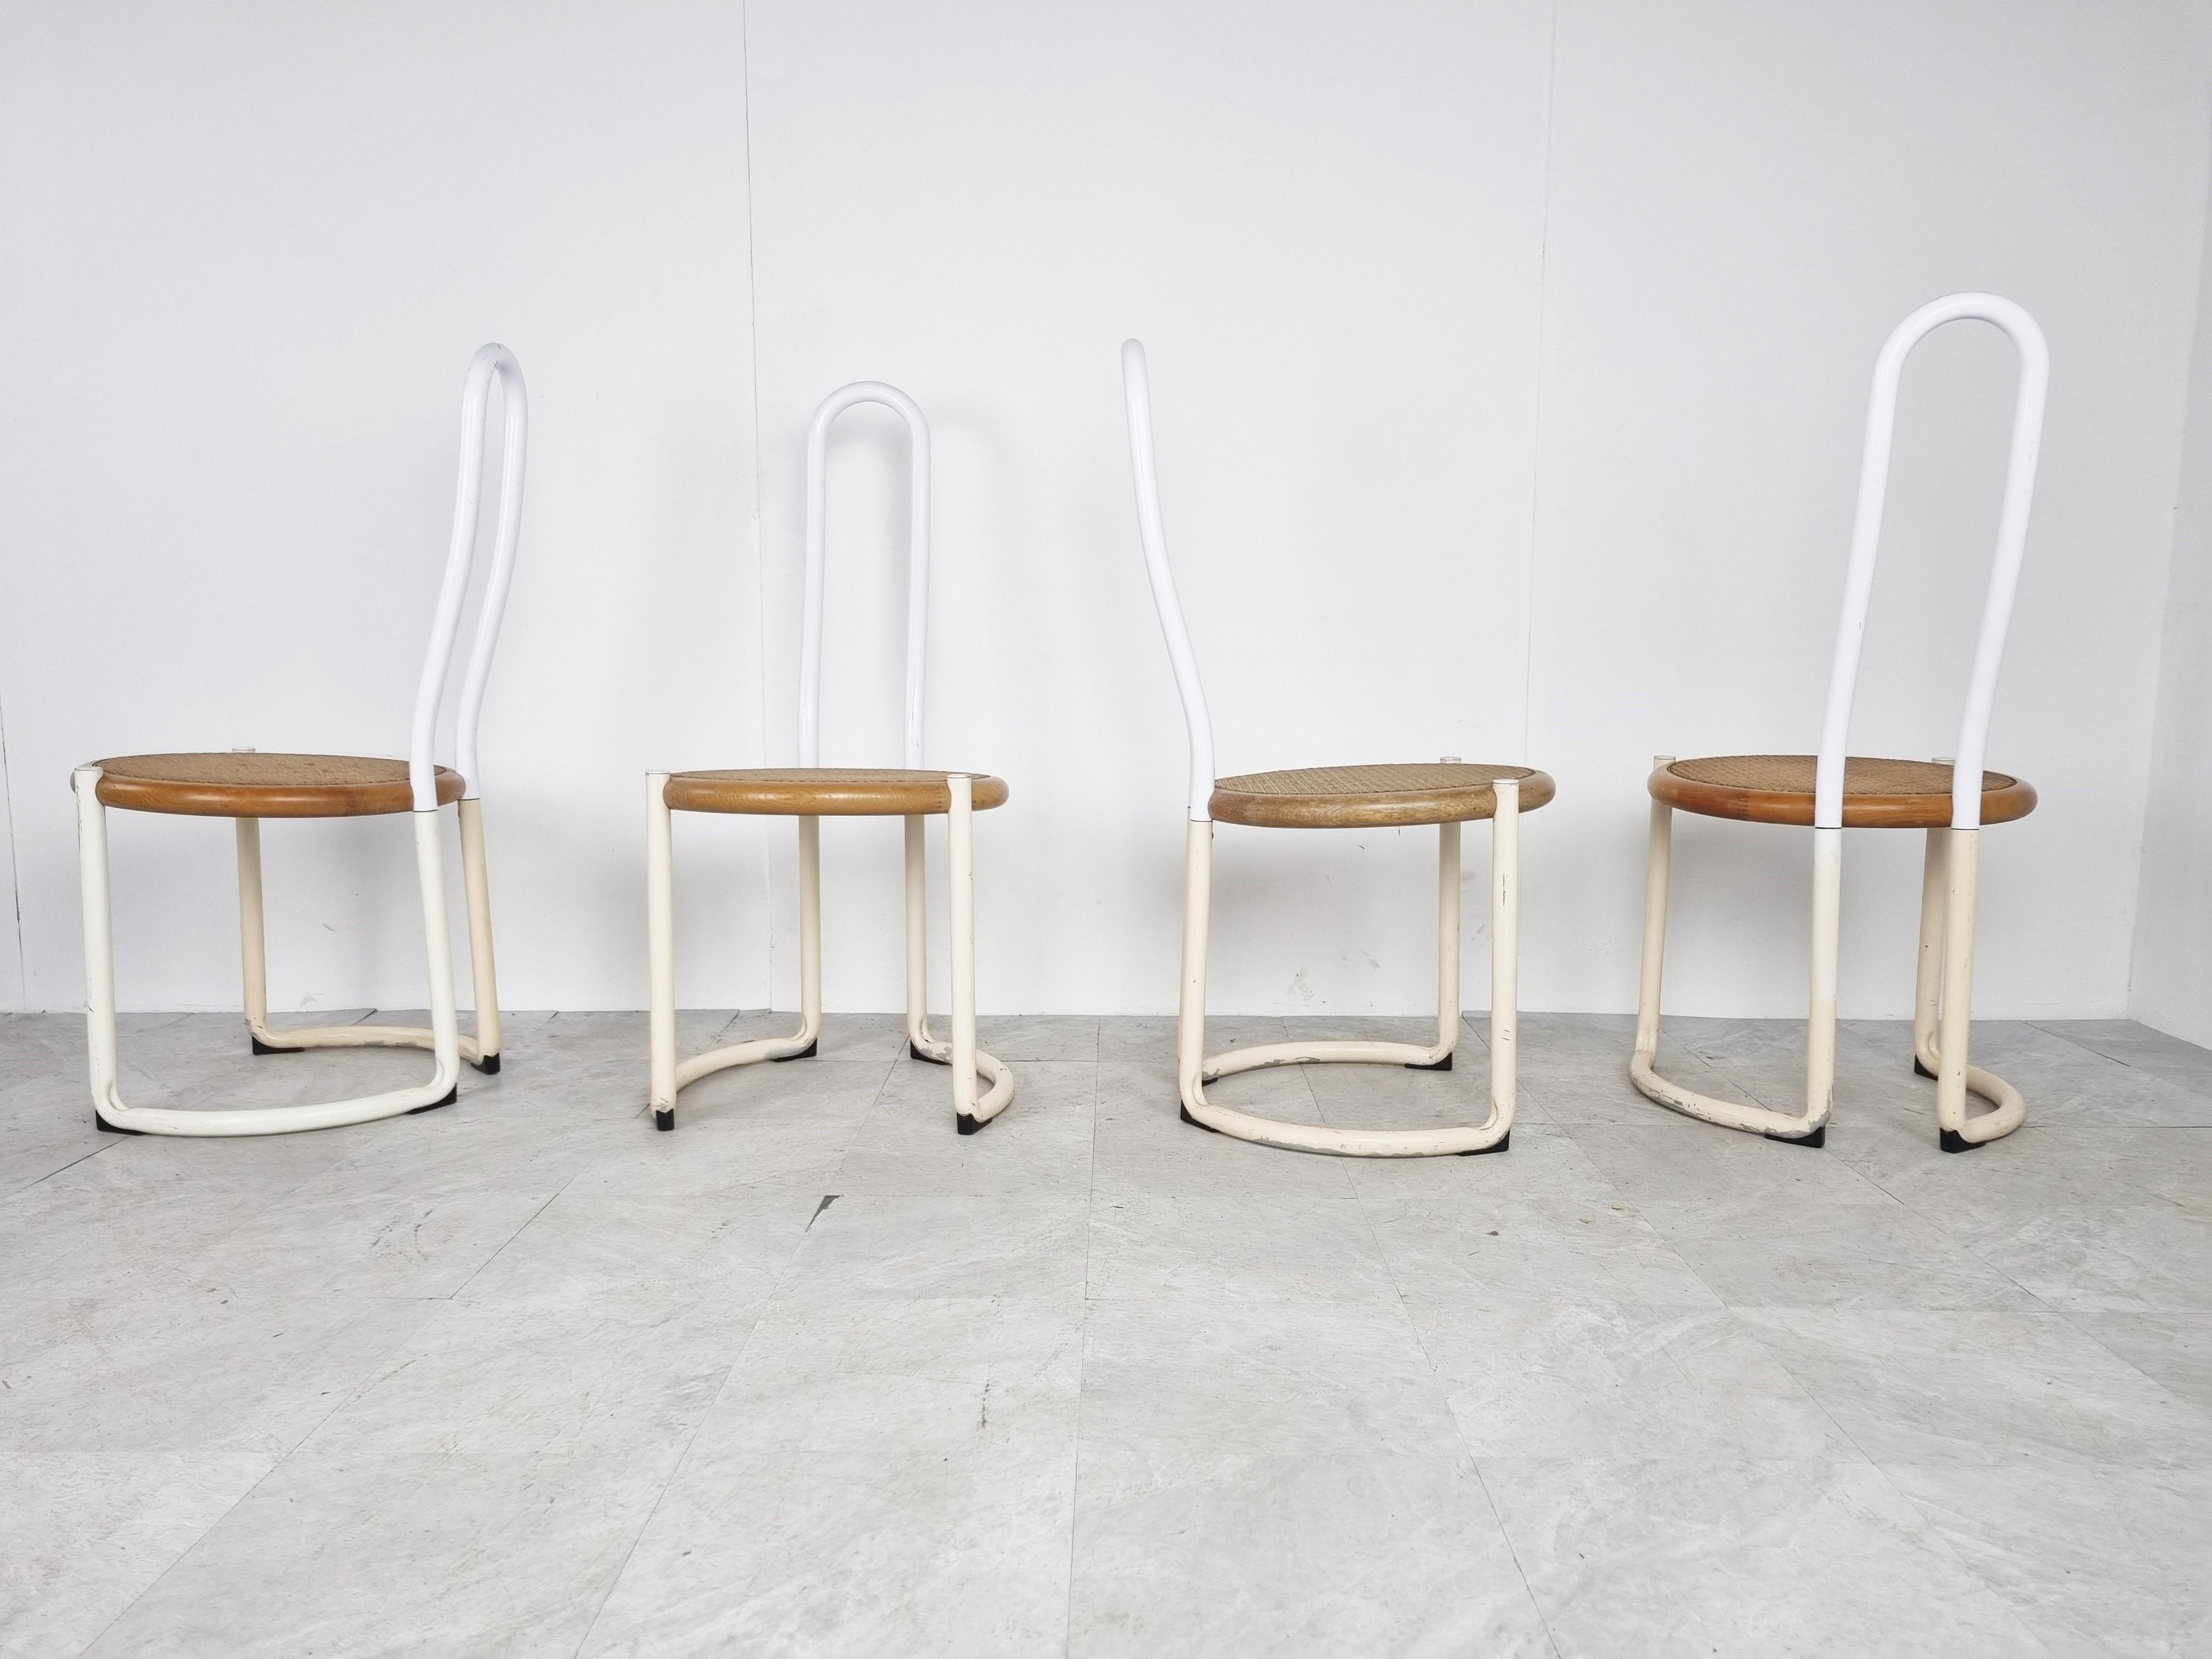 Italian metal postmodern or Bauhaus inspired design dining chairs with white lacquered metal tubular frames and beech wood and rattan seats.

Unknown designer.

Striking design.

The frames can be redone if desired, but we left them in their